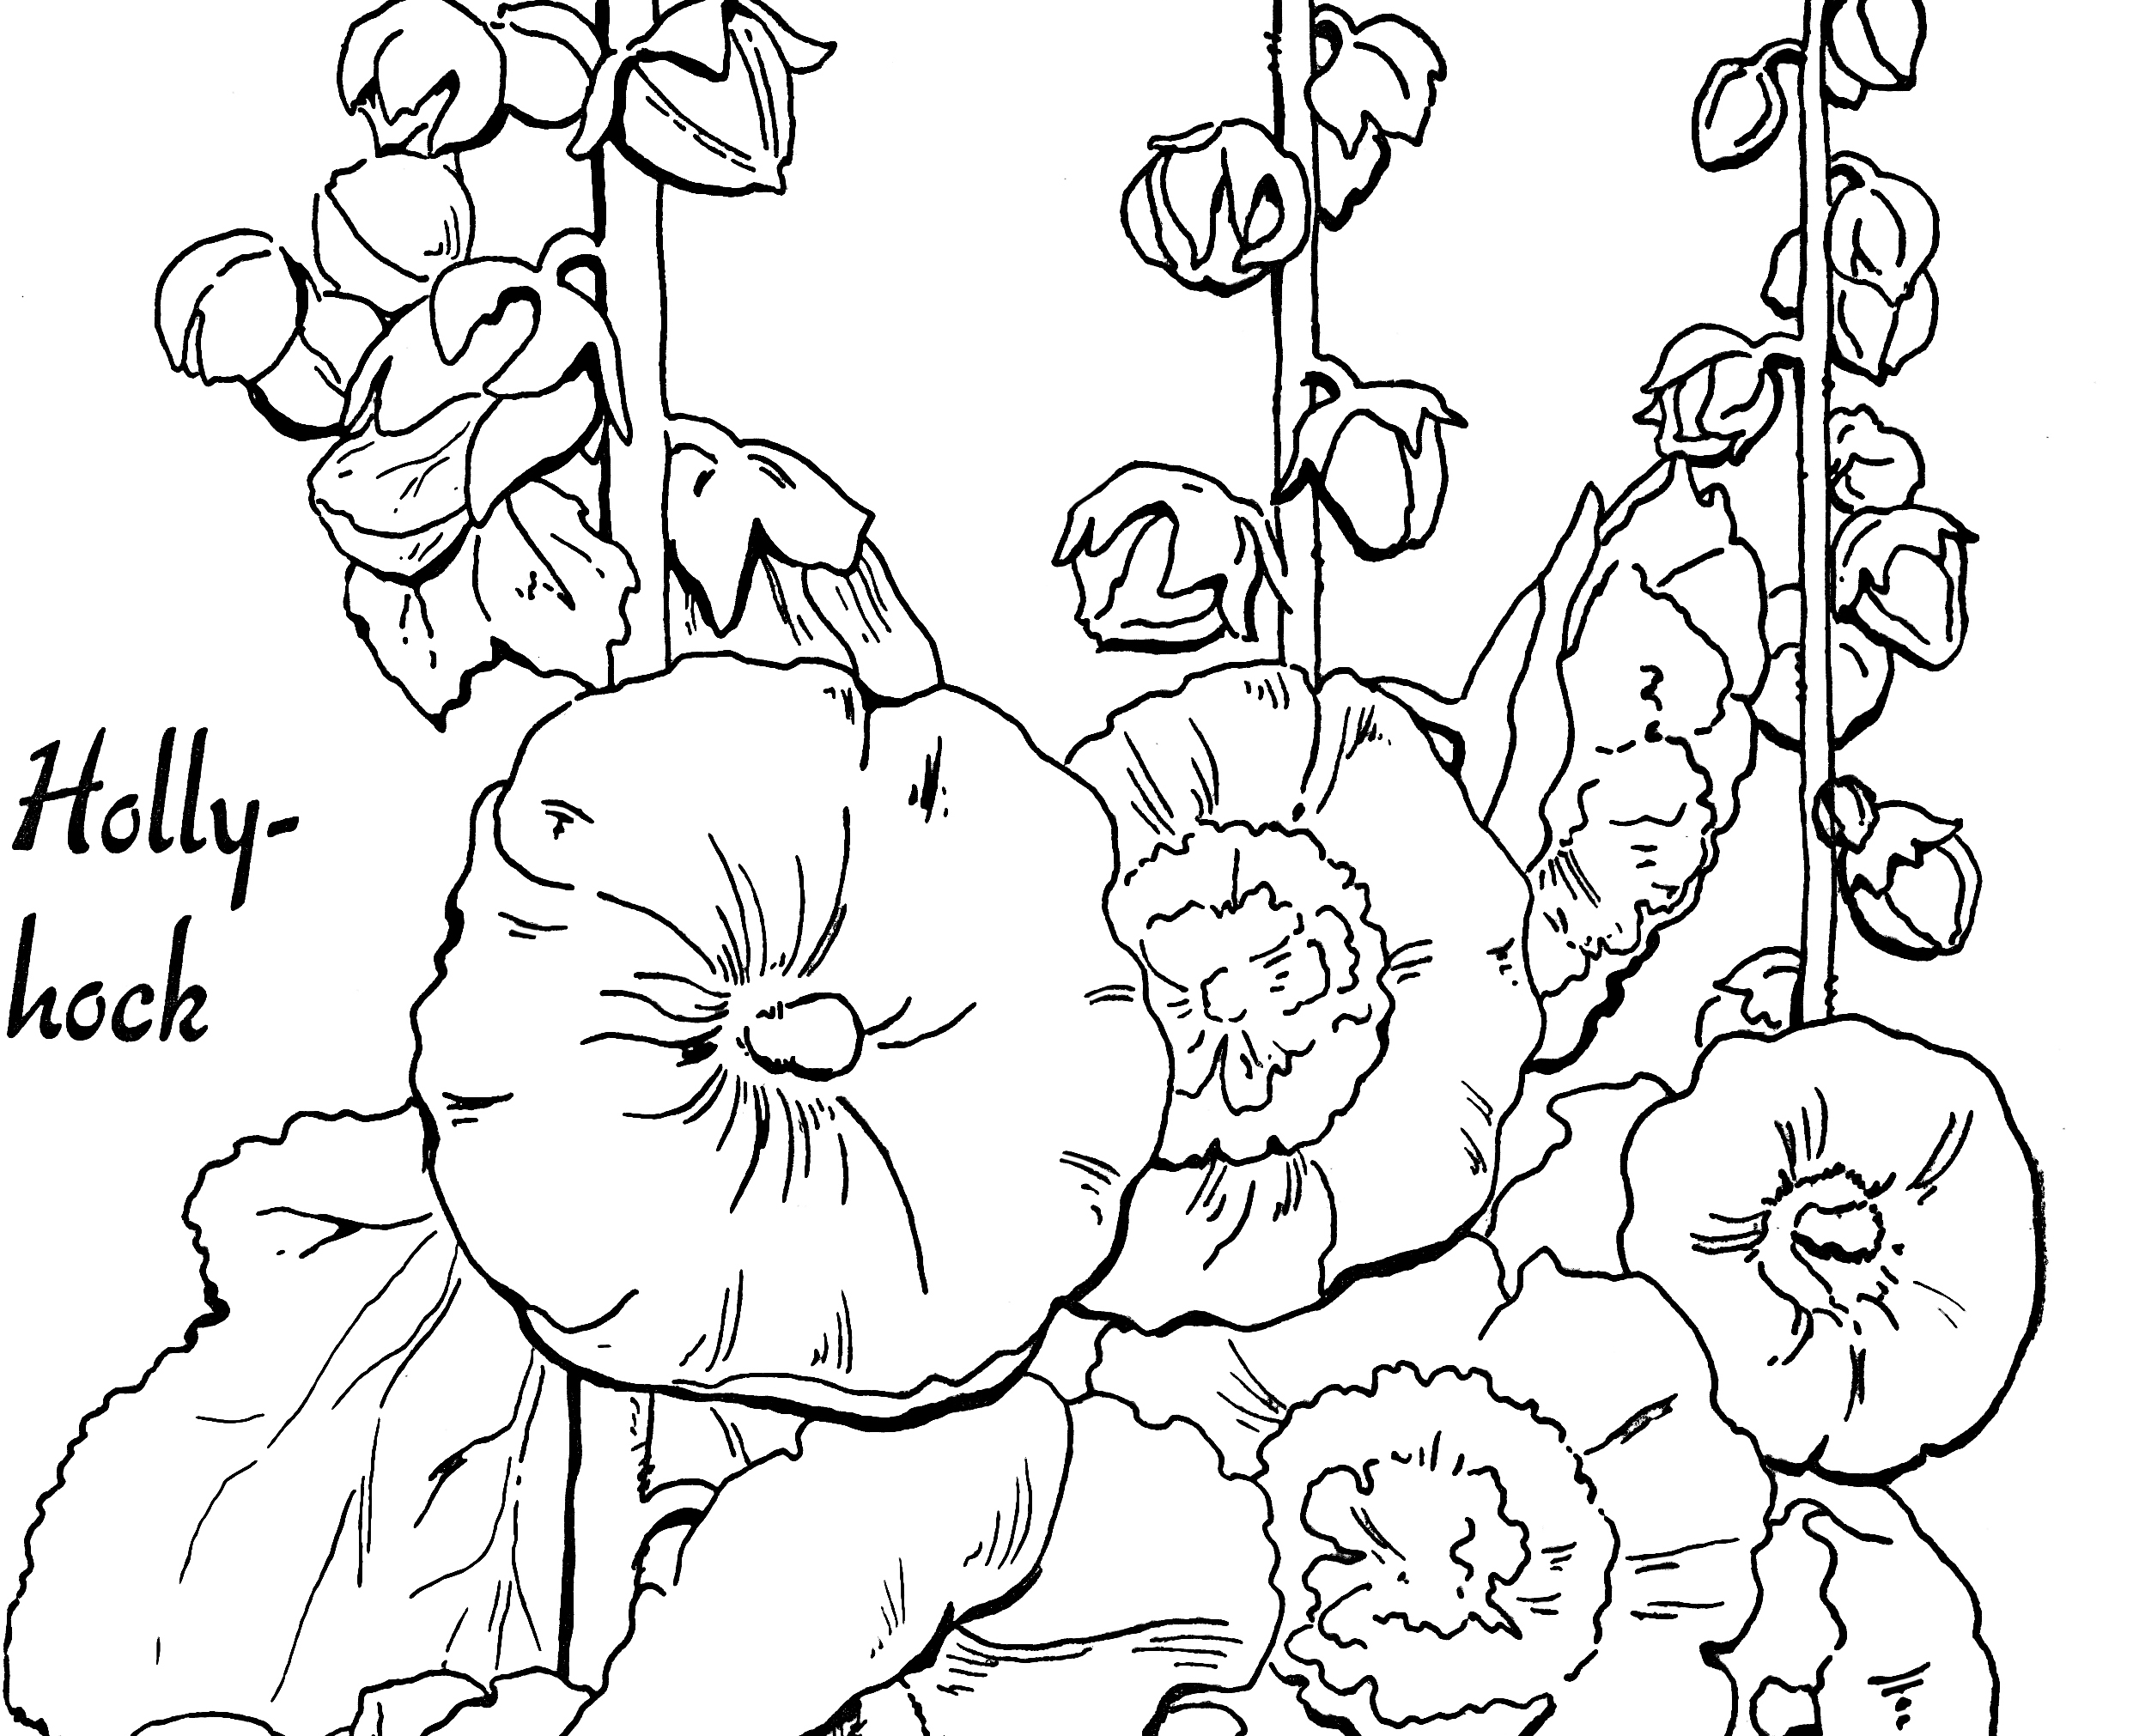 Download Adult Coloring Page Hollyhocks - Lovely! - The Graphics Fairy